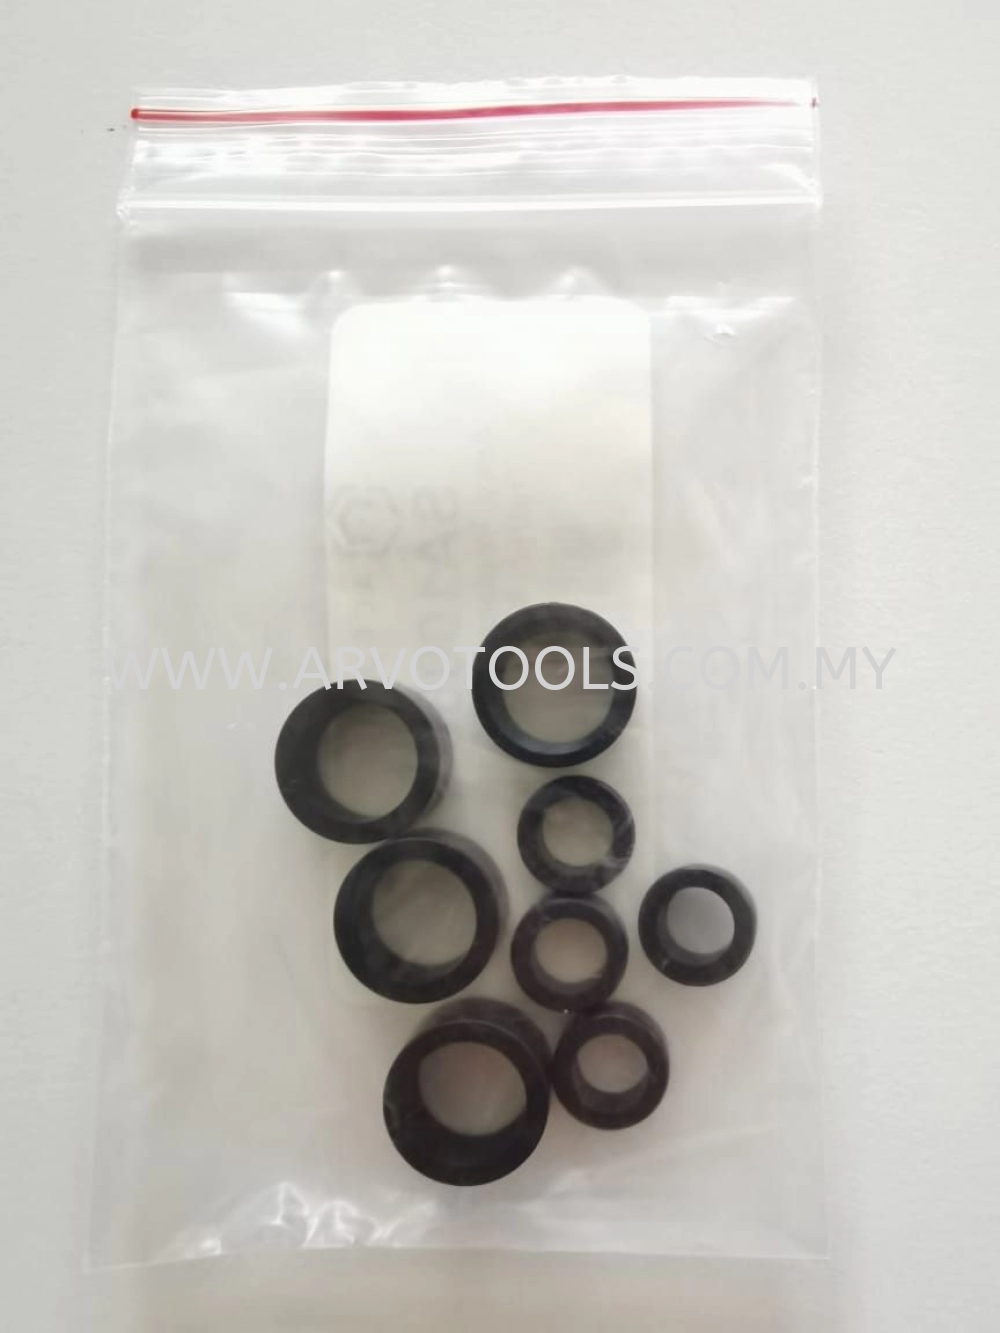 ACCUTOOLS REPLACEMENT GASKETS, TRUBLU HI-FLOW ADAPTERS (SA10868-1)